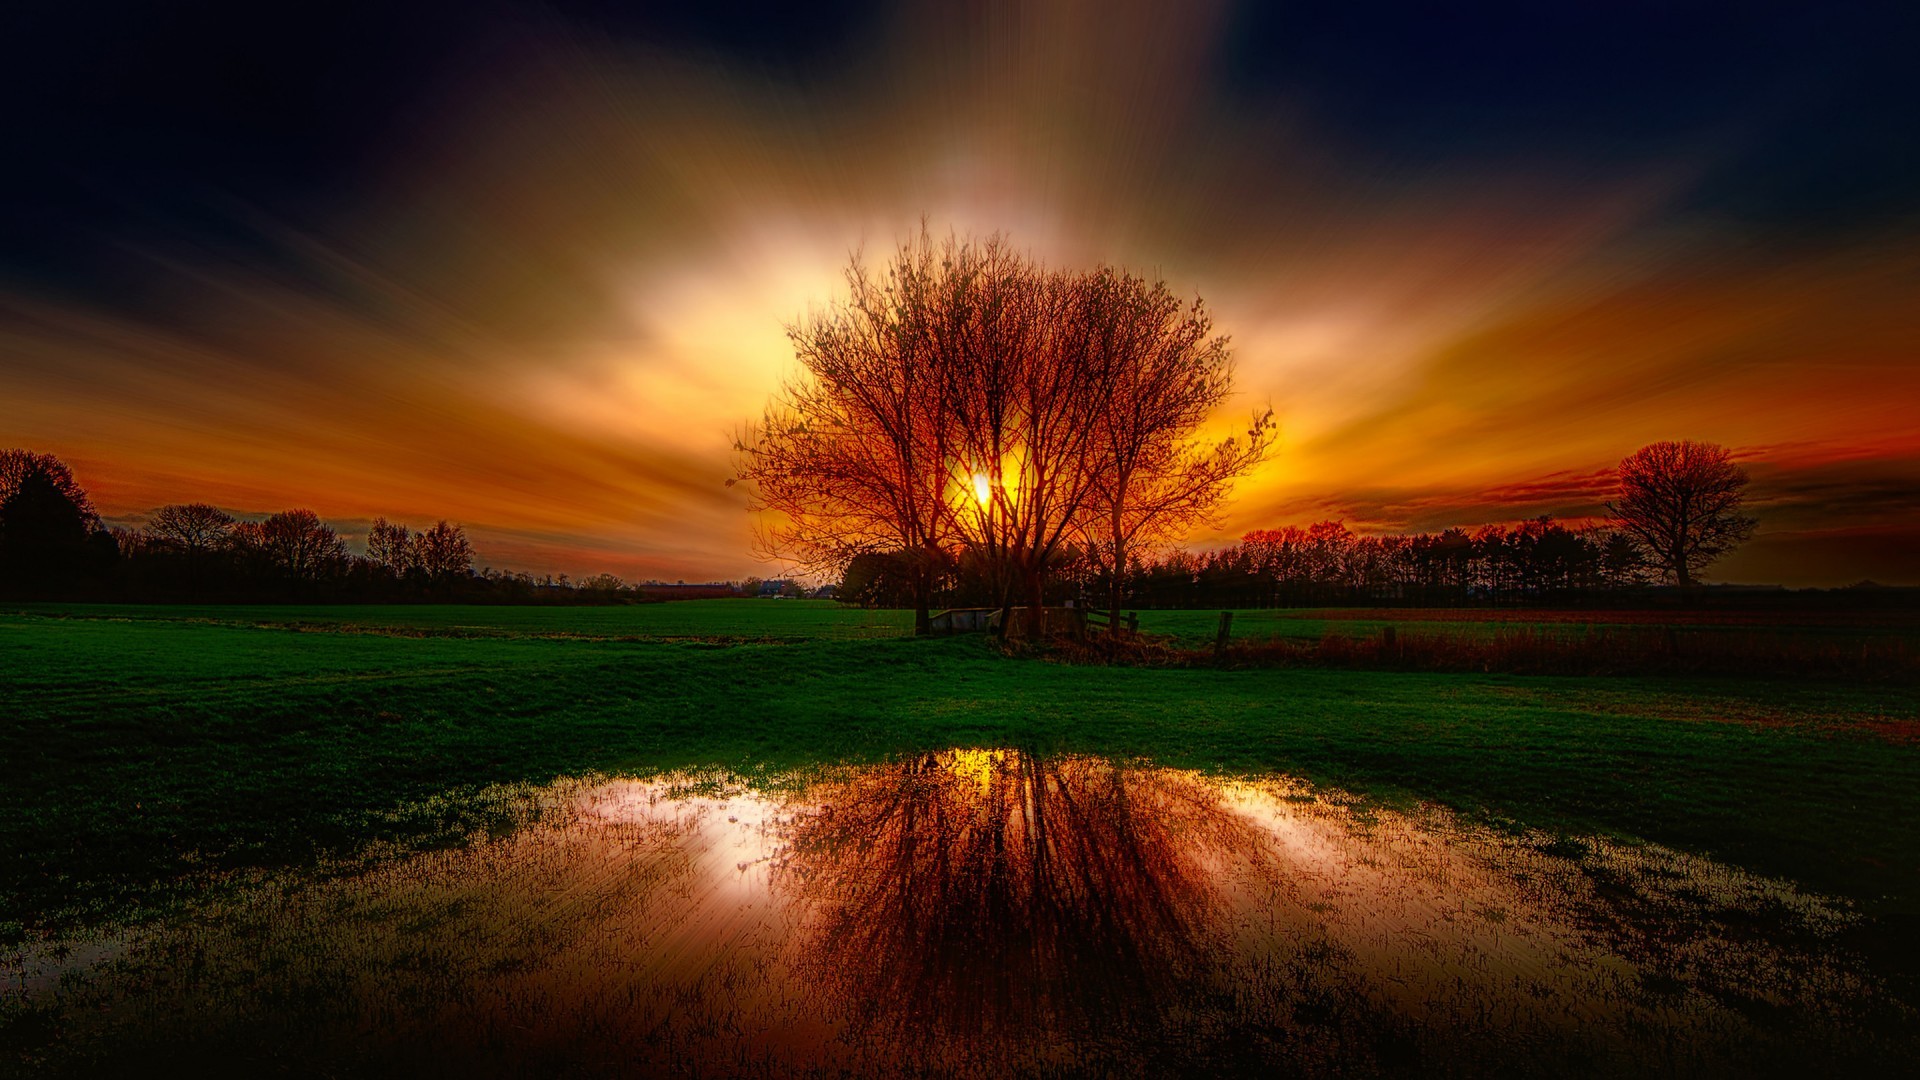 General 1920x1080 nature HDR pond trees sunset landscape sunlight reflection field low light